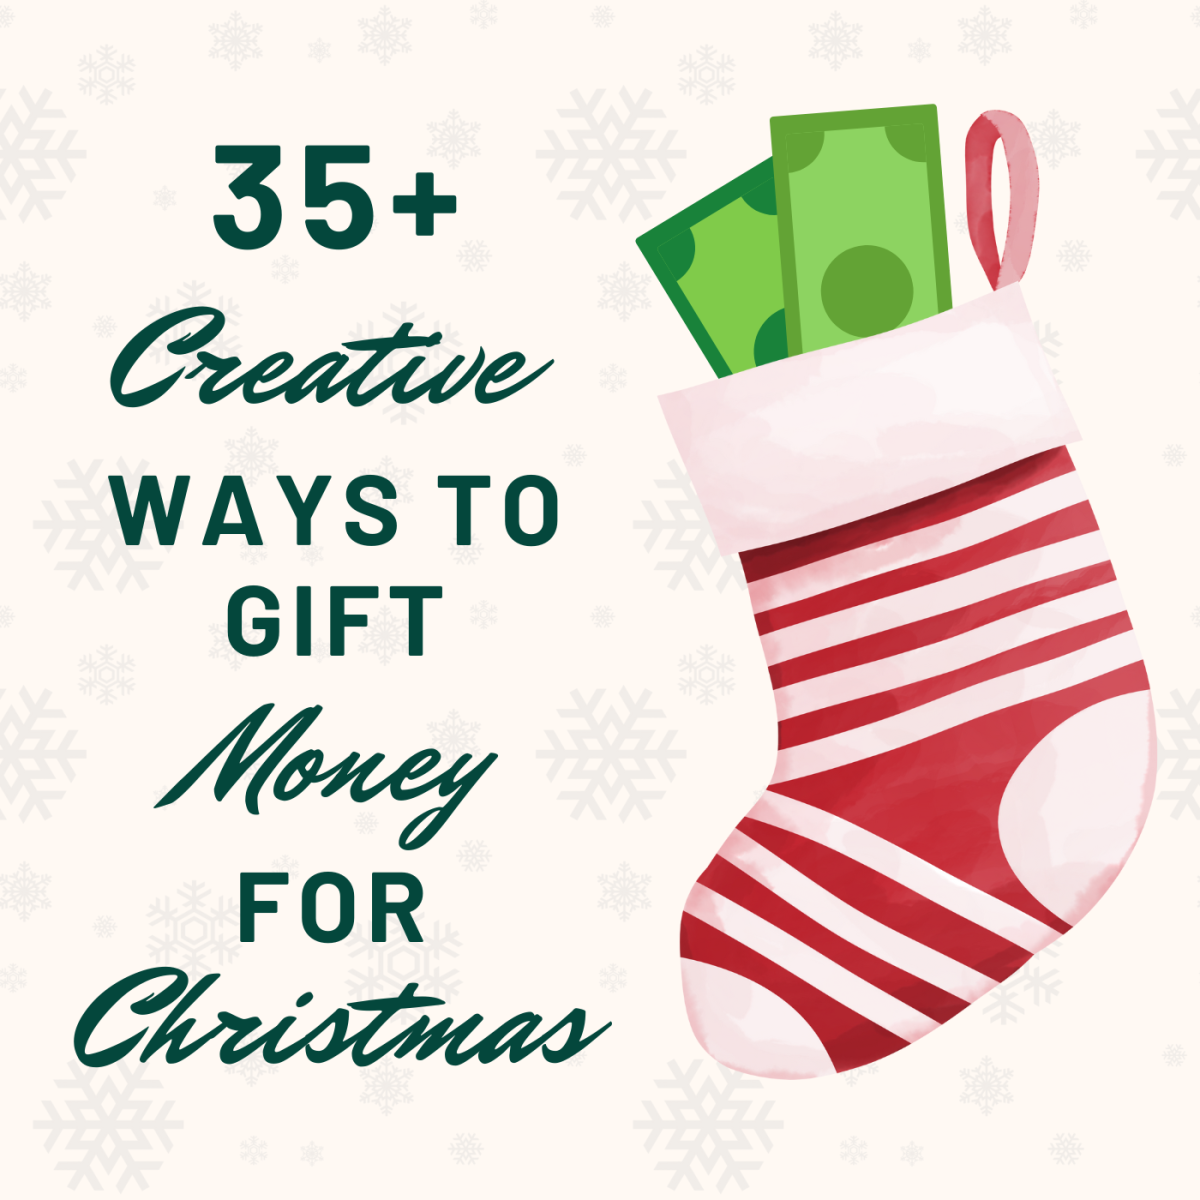 35+ exciting ways to gift someone money for Christmas 